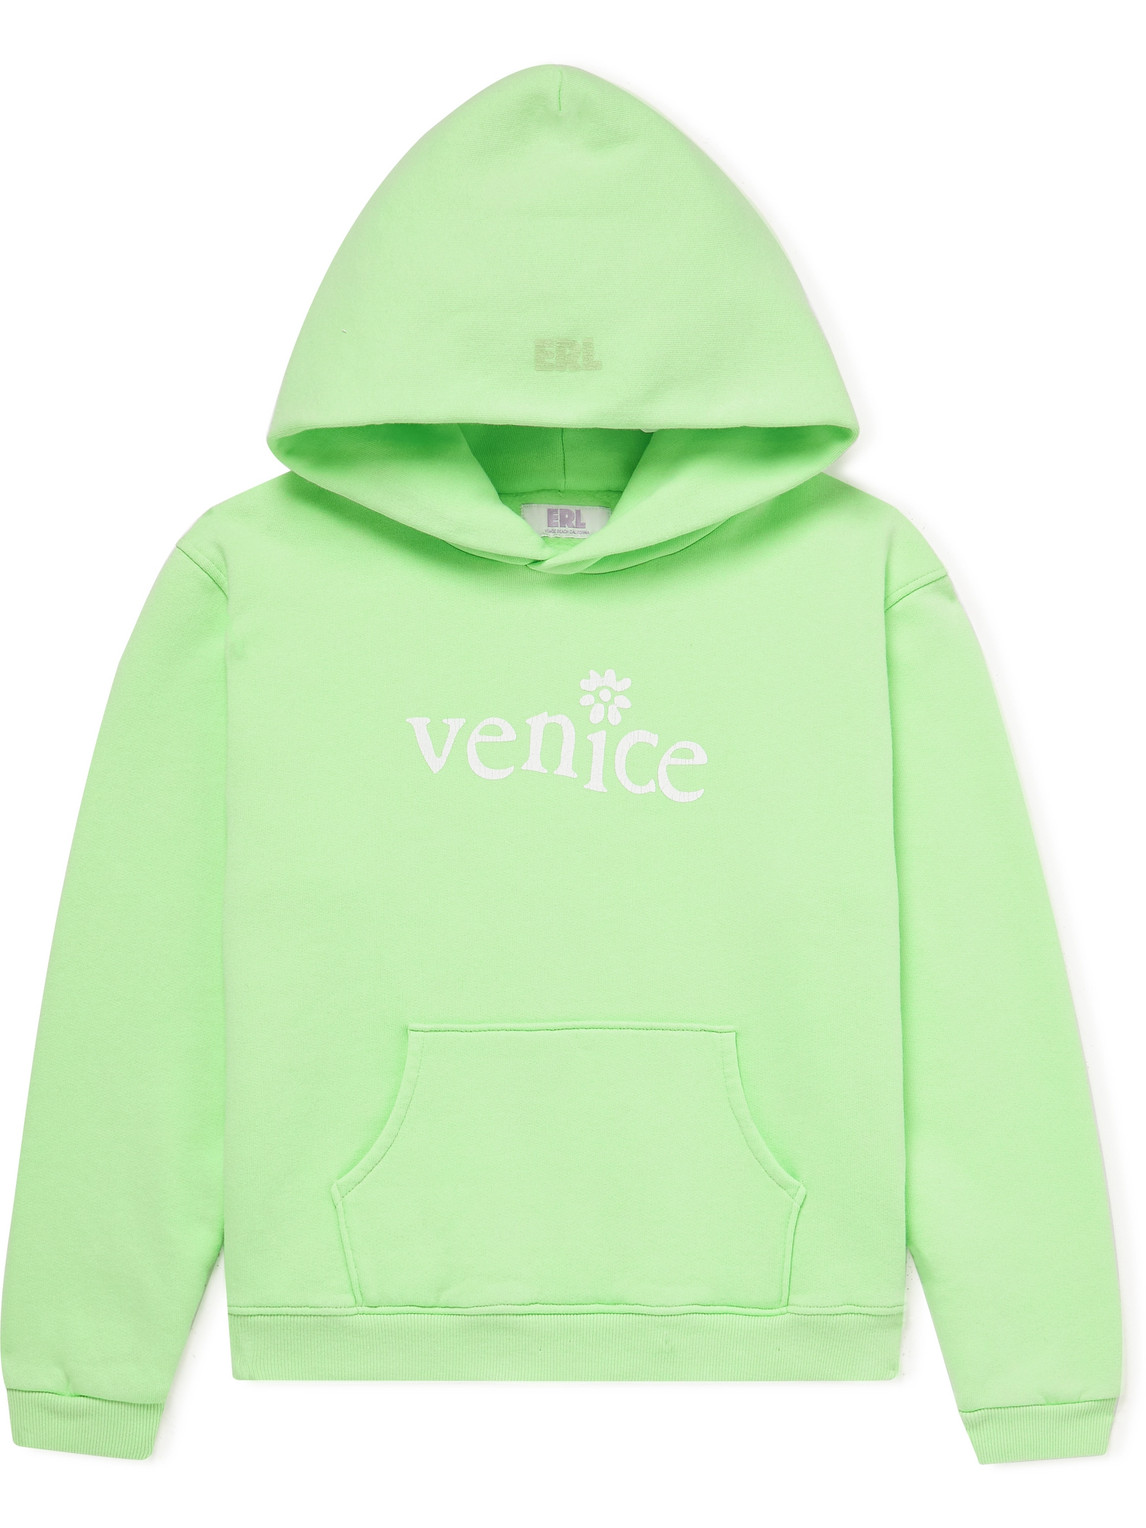 ERL Kids Venice Printed Cotton-Blend Jersey Hoodie